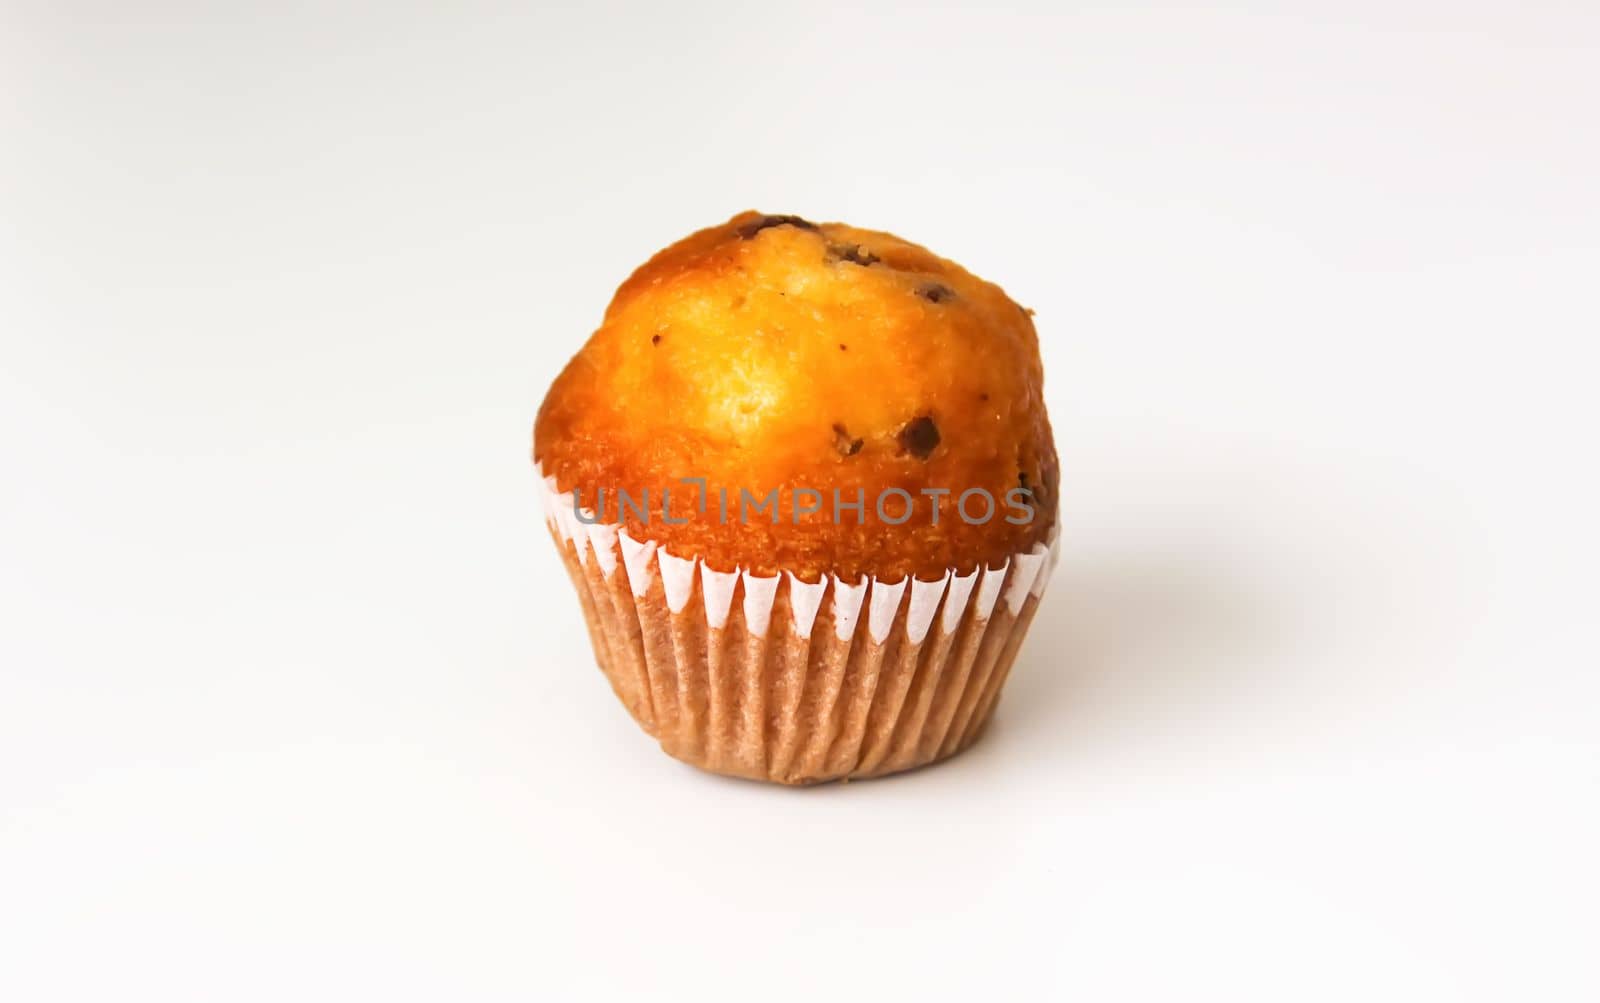 Sweet muffin cup cake closeup on white background.